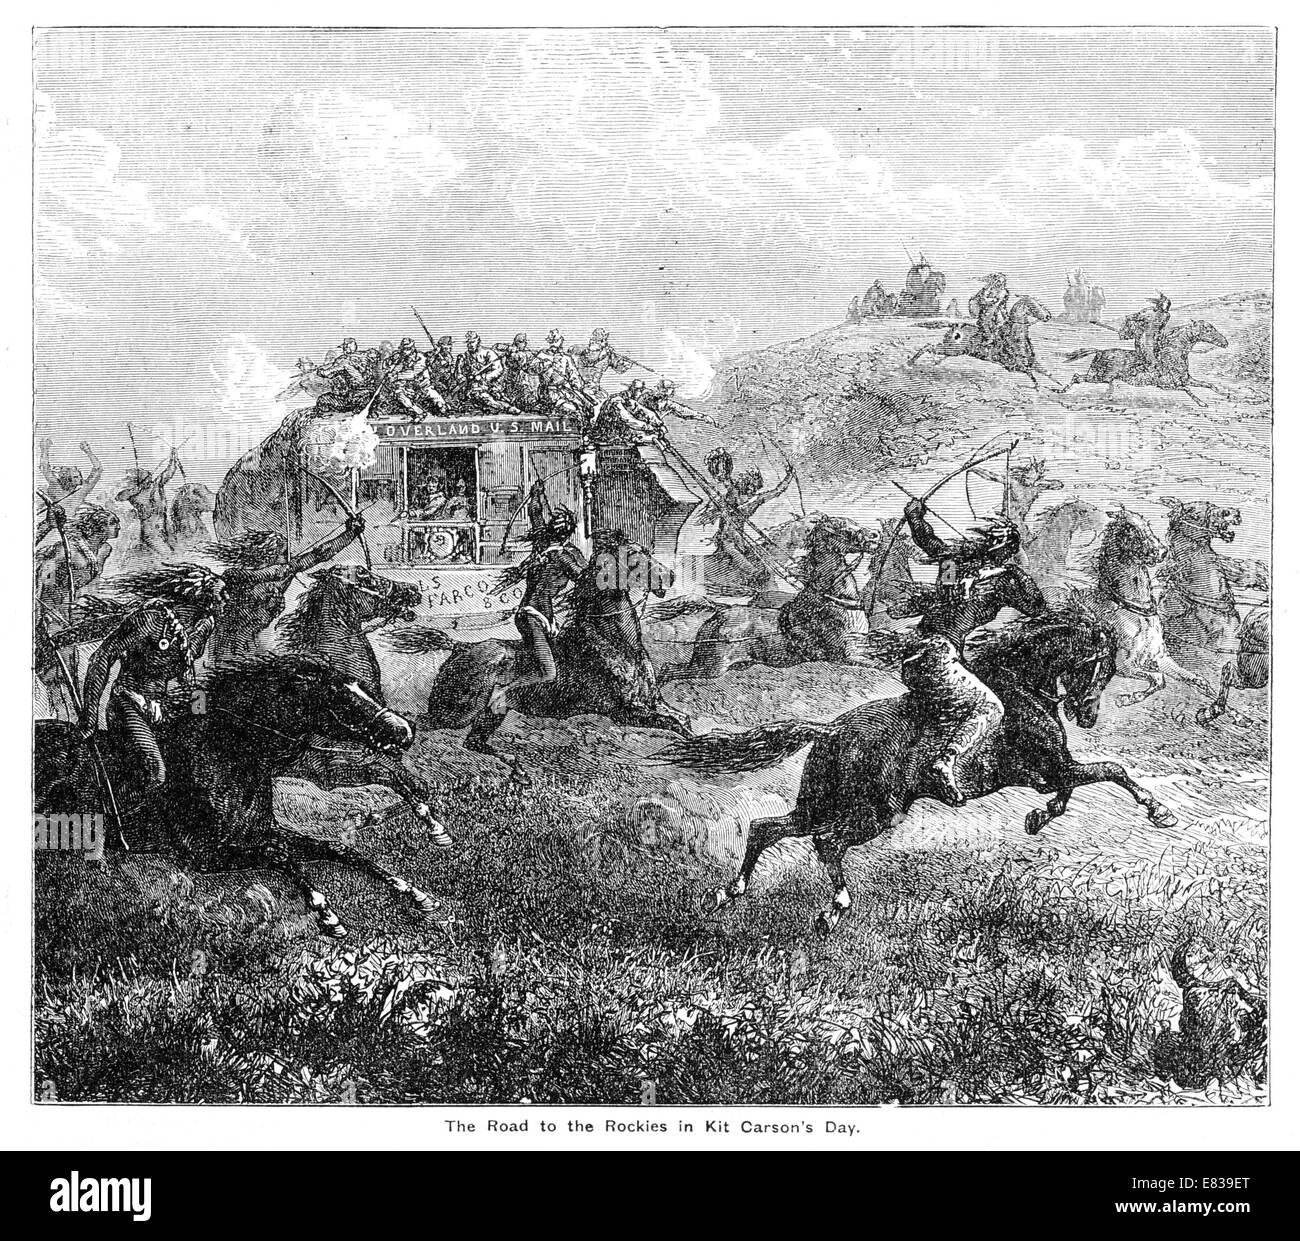 The road to the Rockies in Kit Carson's Day Wells Fargo overland US Mail stage coach under attack from hostile Indians Stock Photo